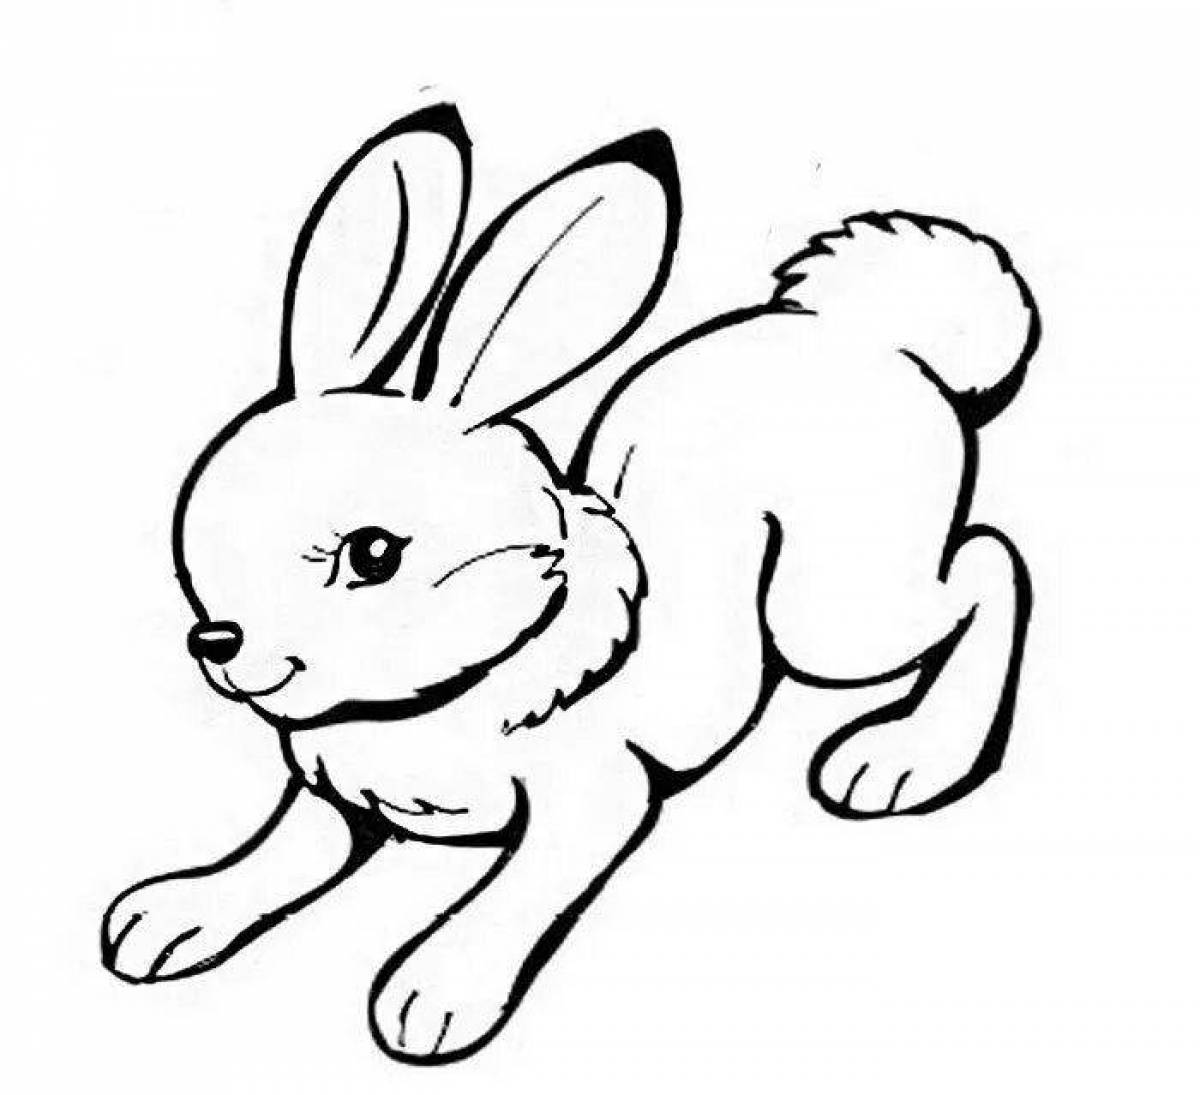 Adorable hare drawing